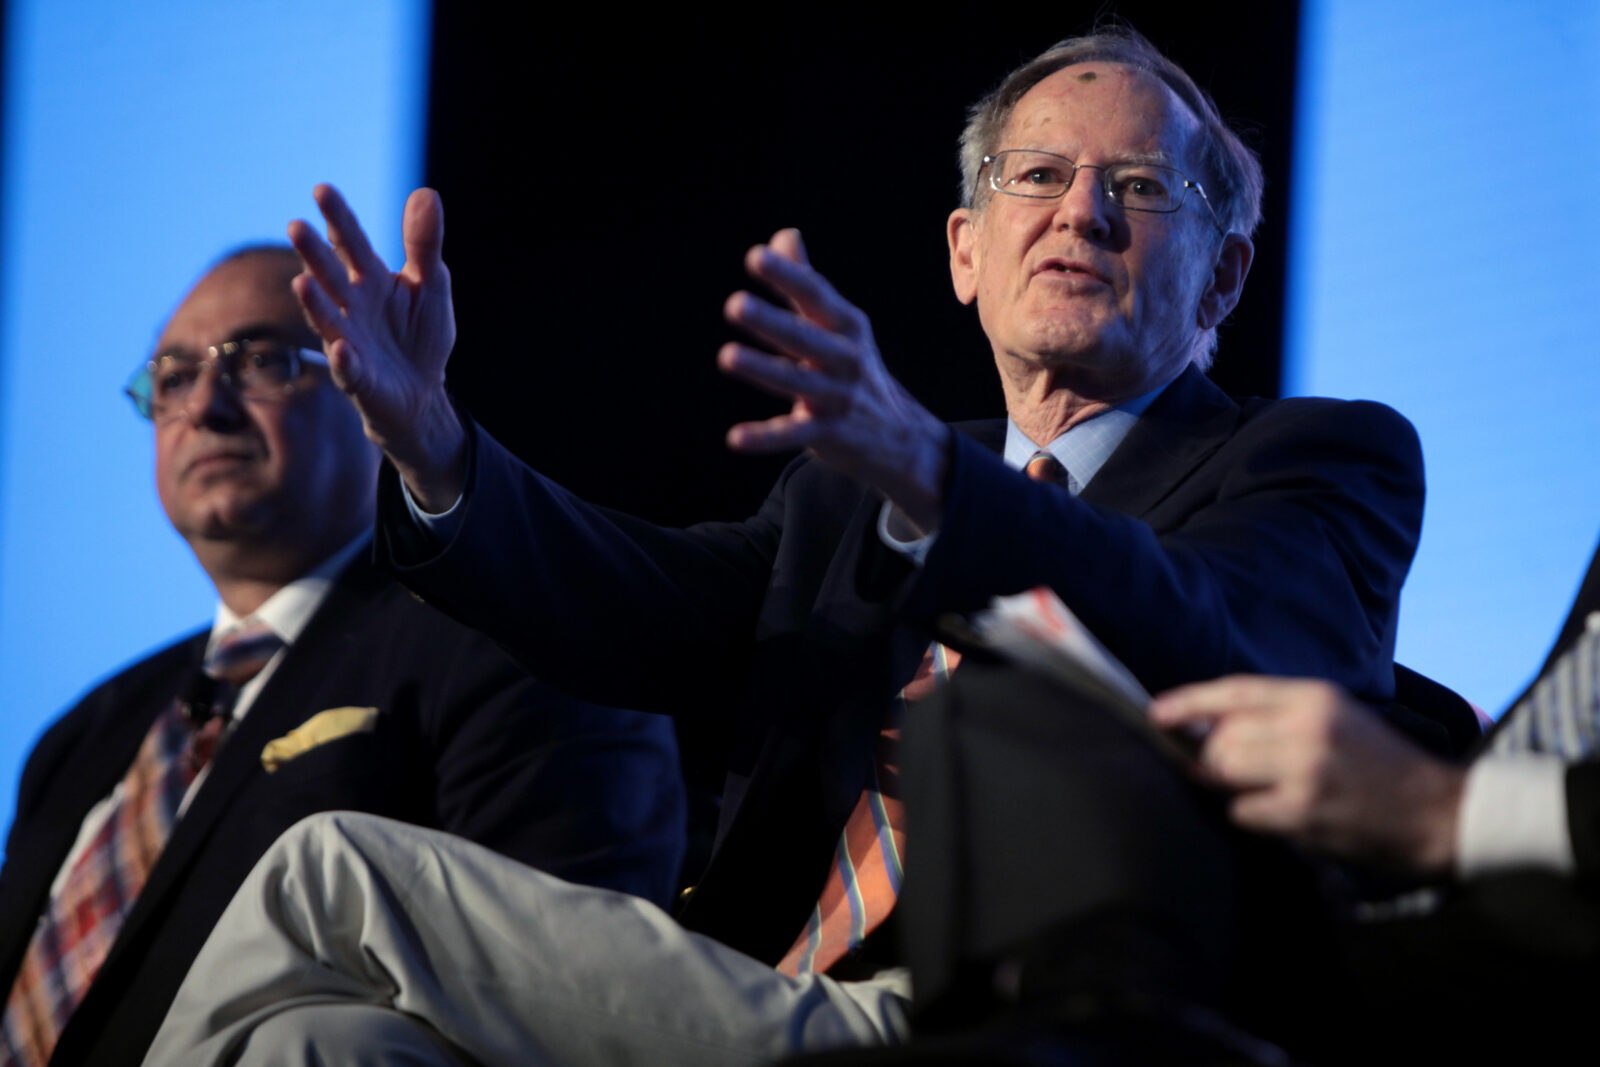 George Gilder at FreedomFest 2016 at Planet Hollywood in Las Vegas, Nevada